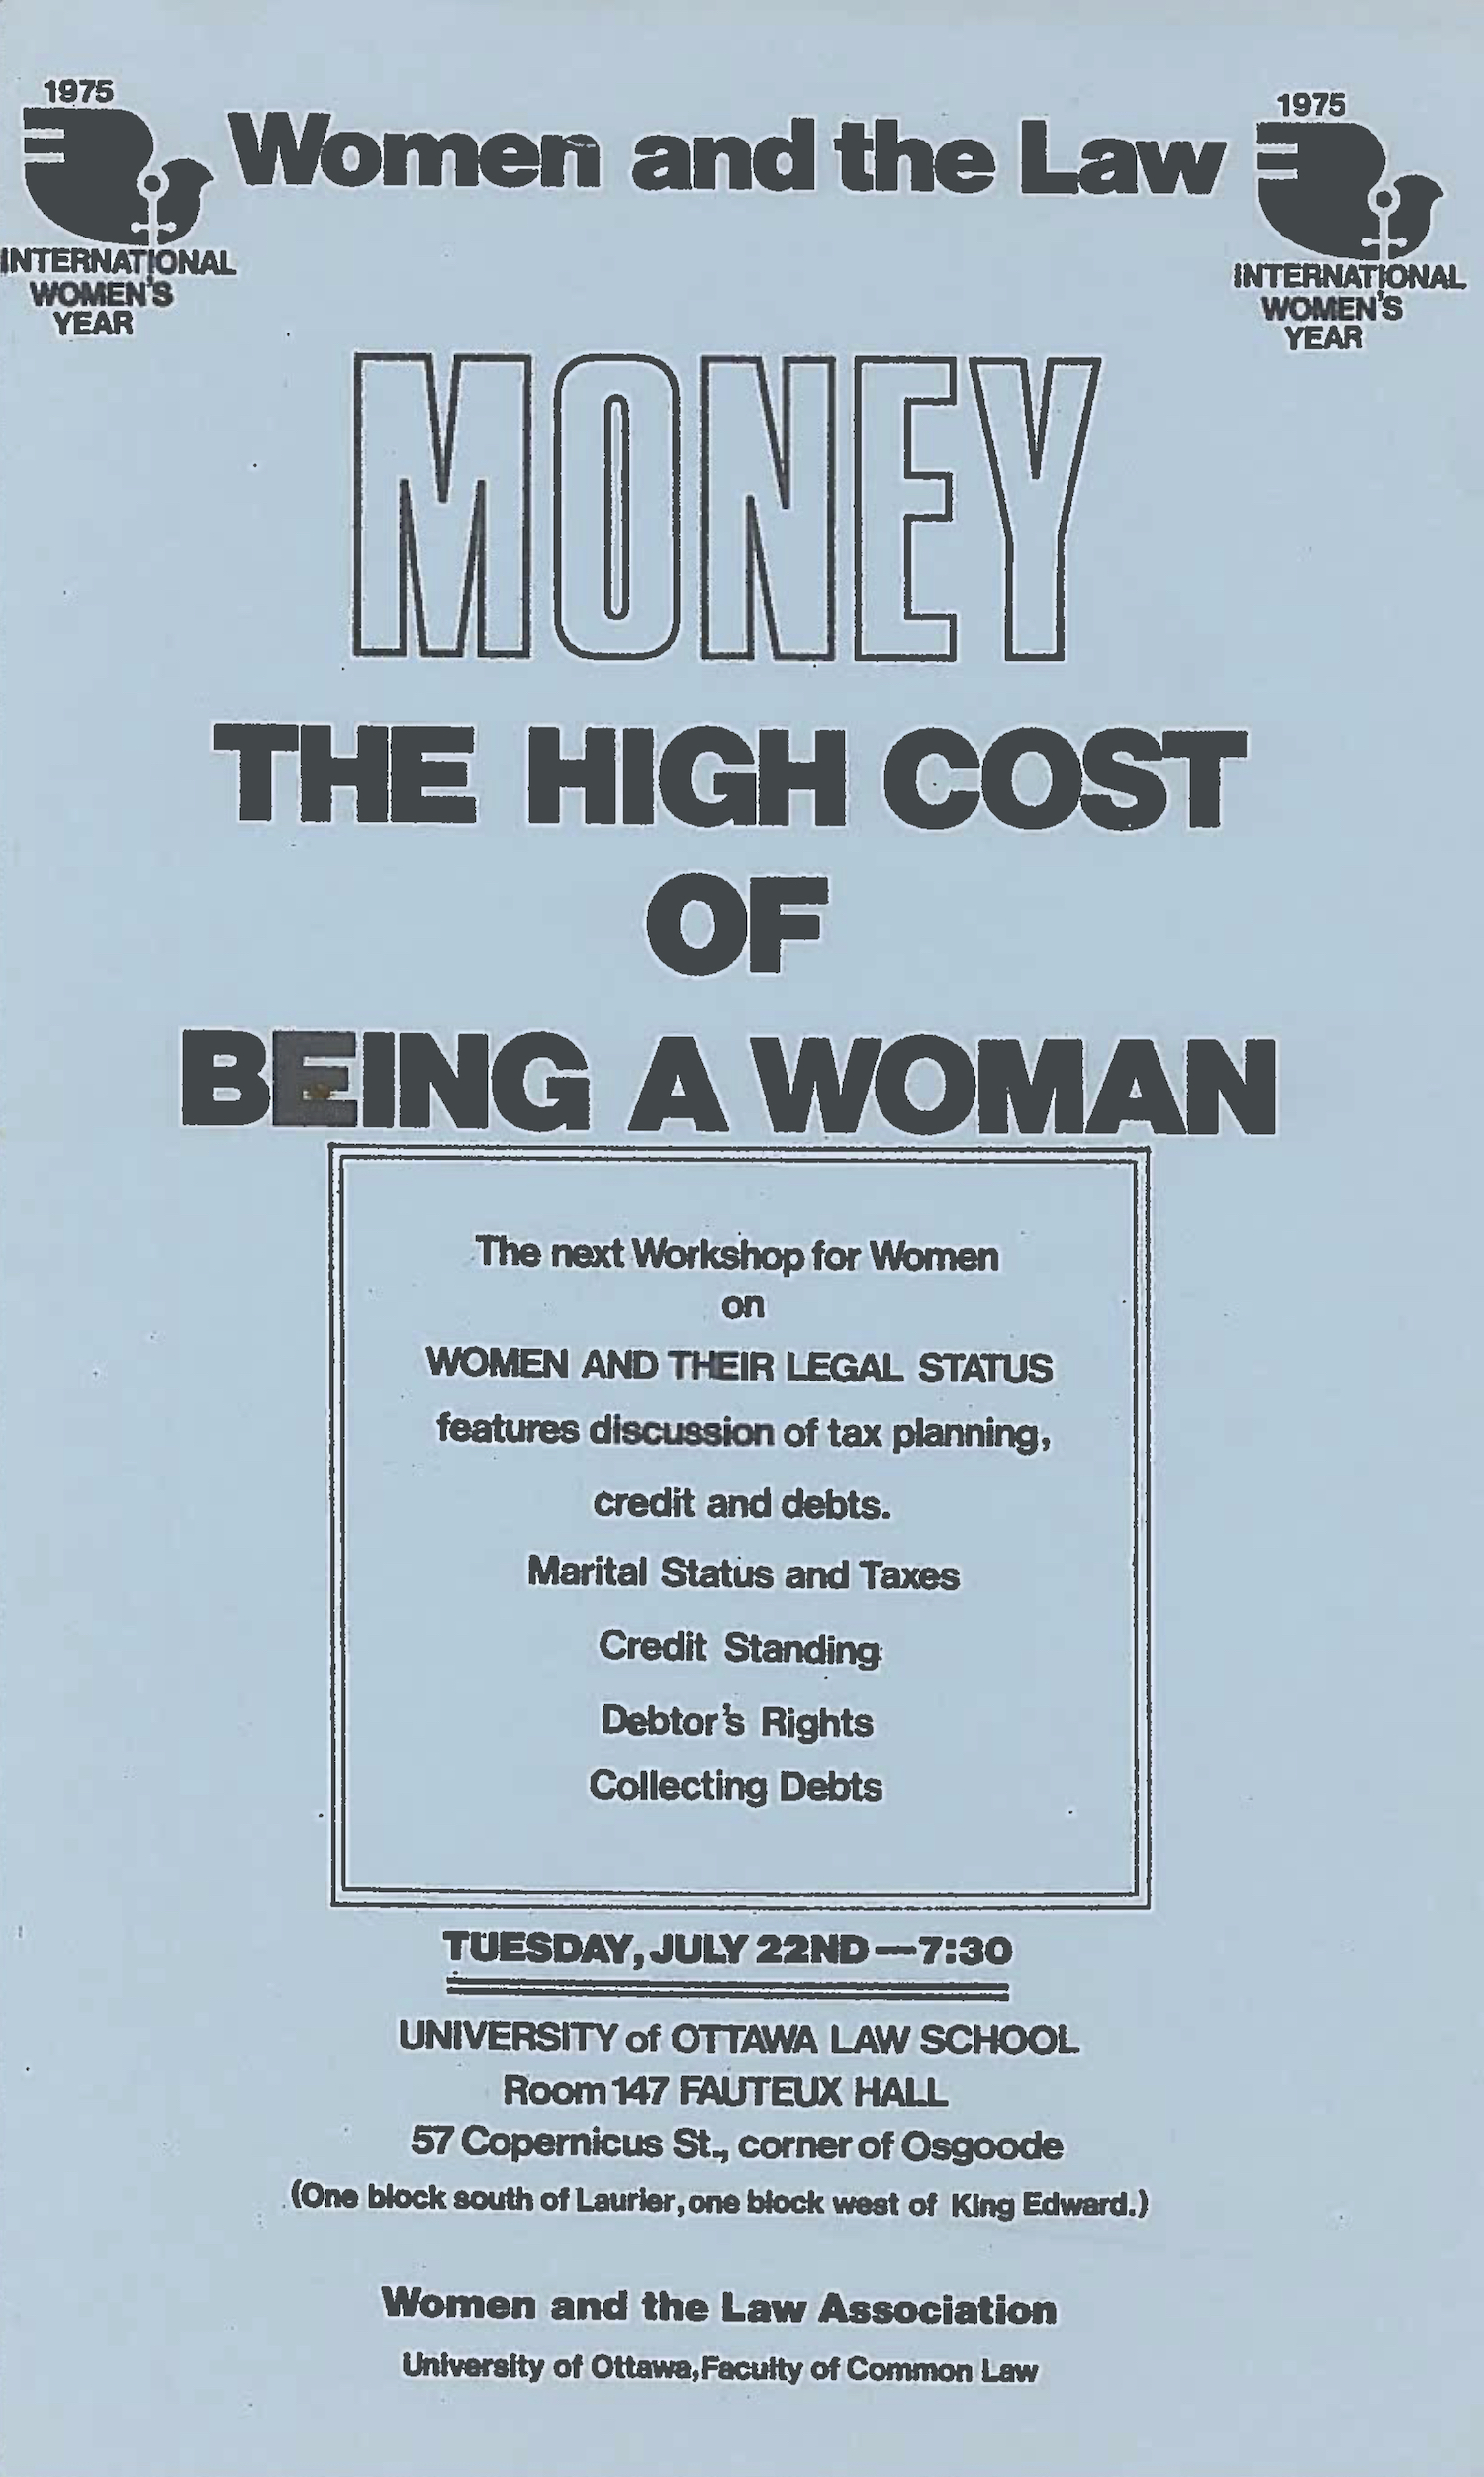 poster advertising Women and the Law talk, The High Cost of Being a Woman